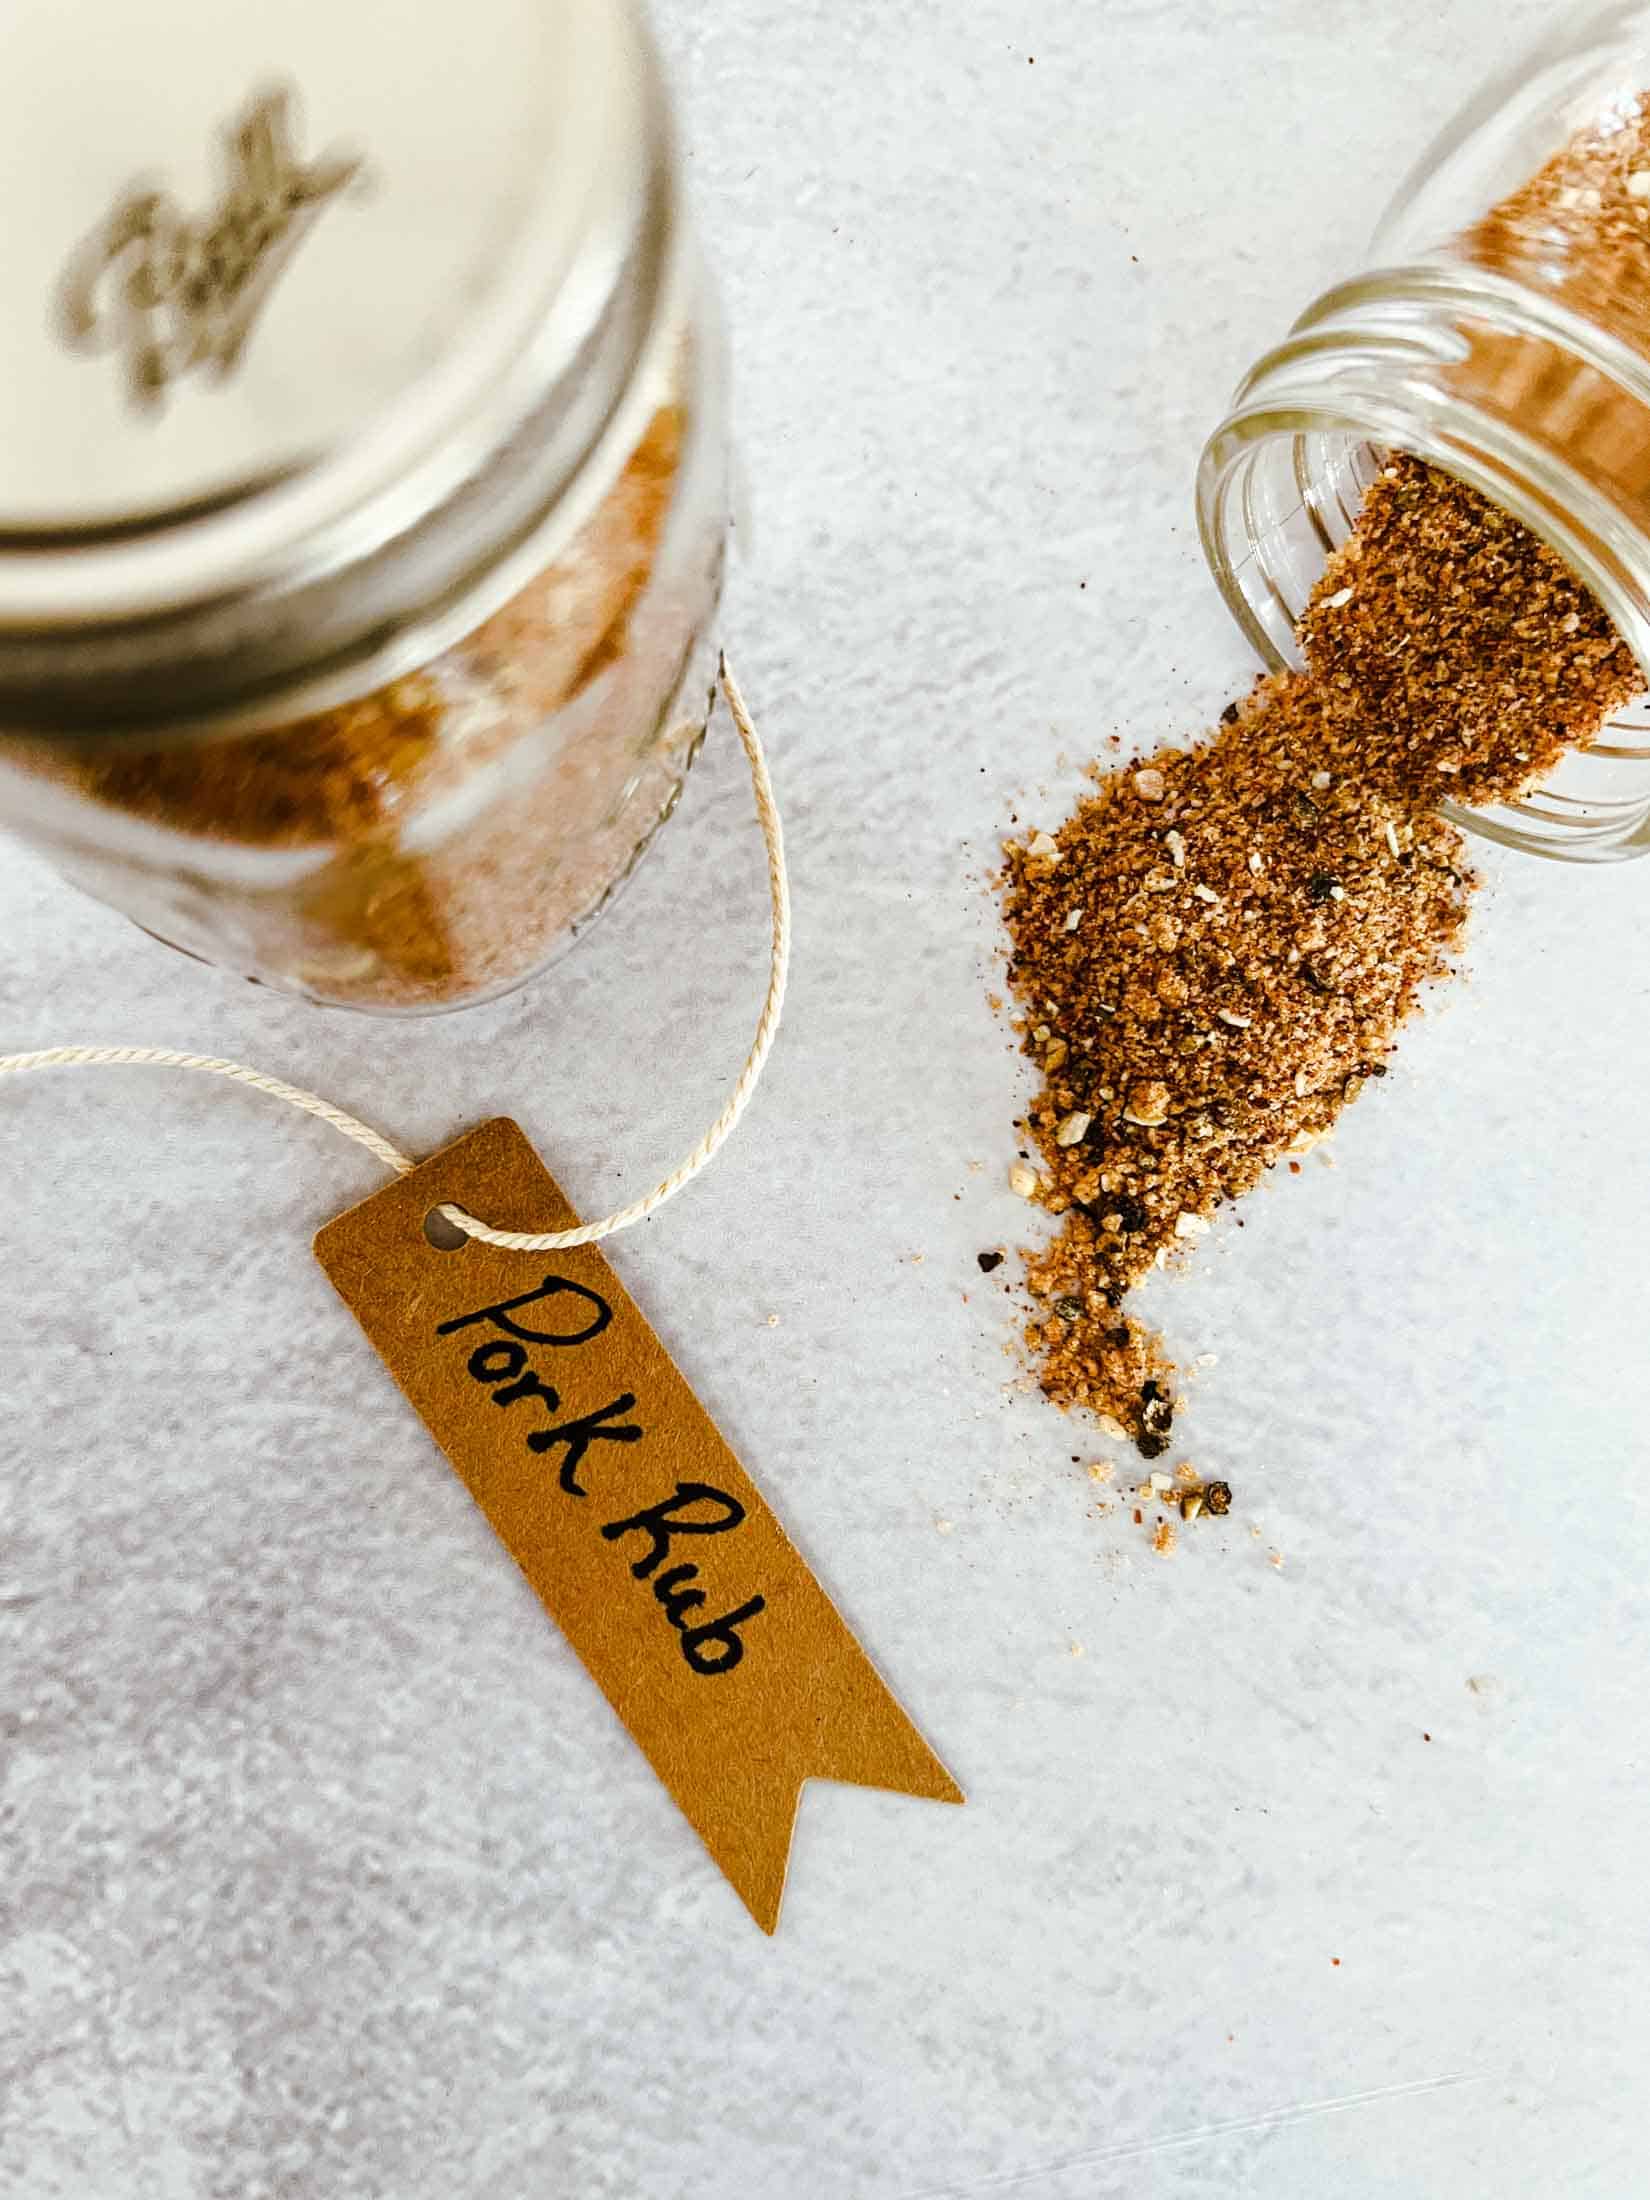 Pork rub in small glass spice jars. One spice jar is tipped over and the pork rub is spilling out.